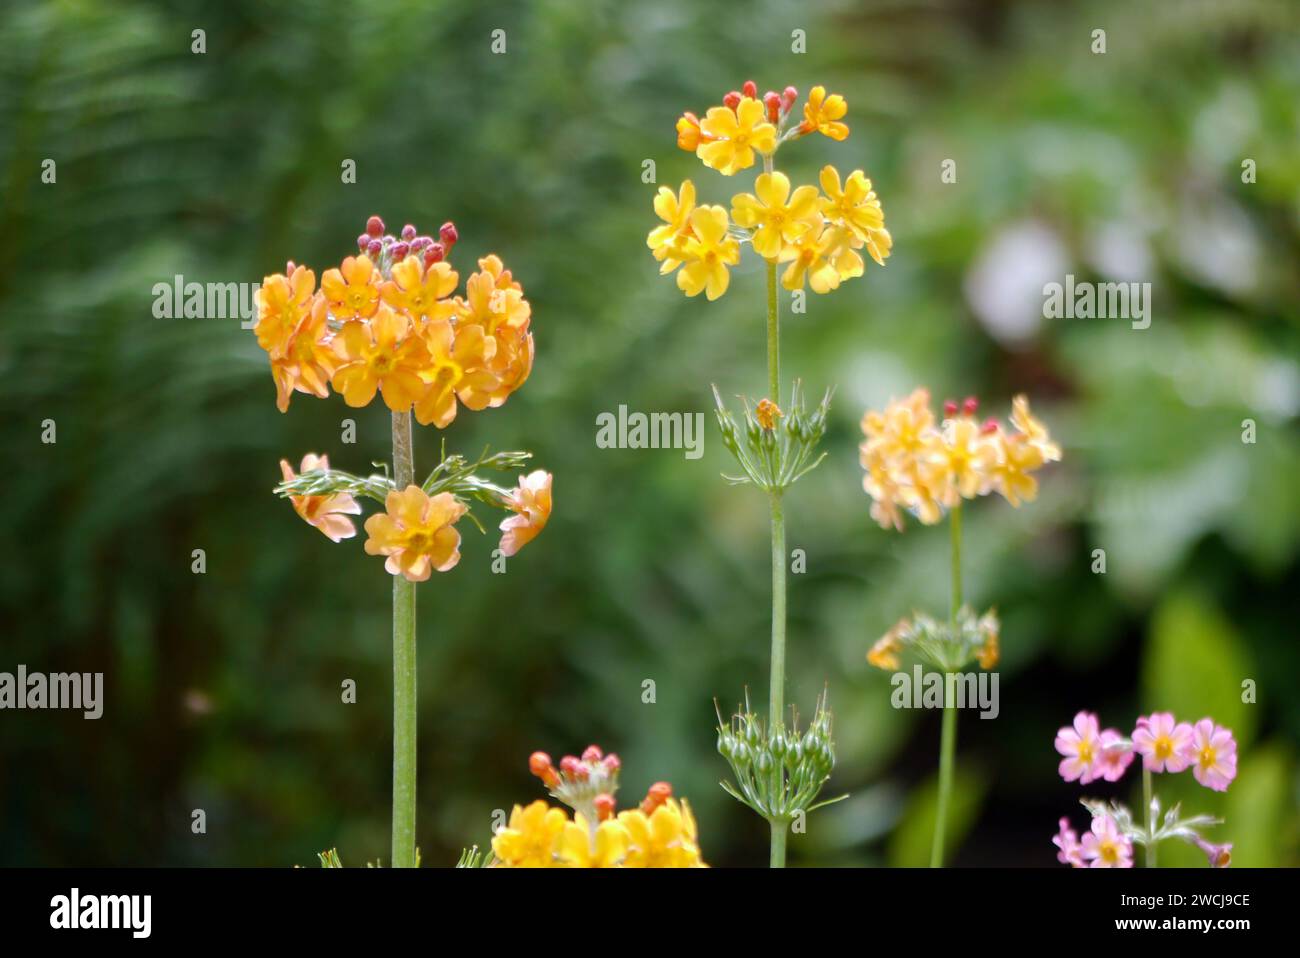 Yellow Candelabra Primulas Flowers Grown in the Borders at RHS Garden Harlow Carr, Harrogate, Yorkshire, Inghilterra, Regno Unito Foto Stock